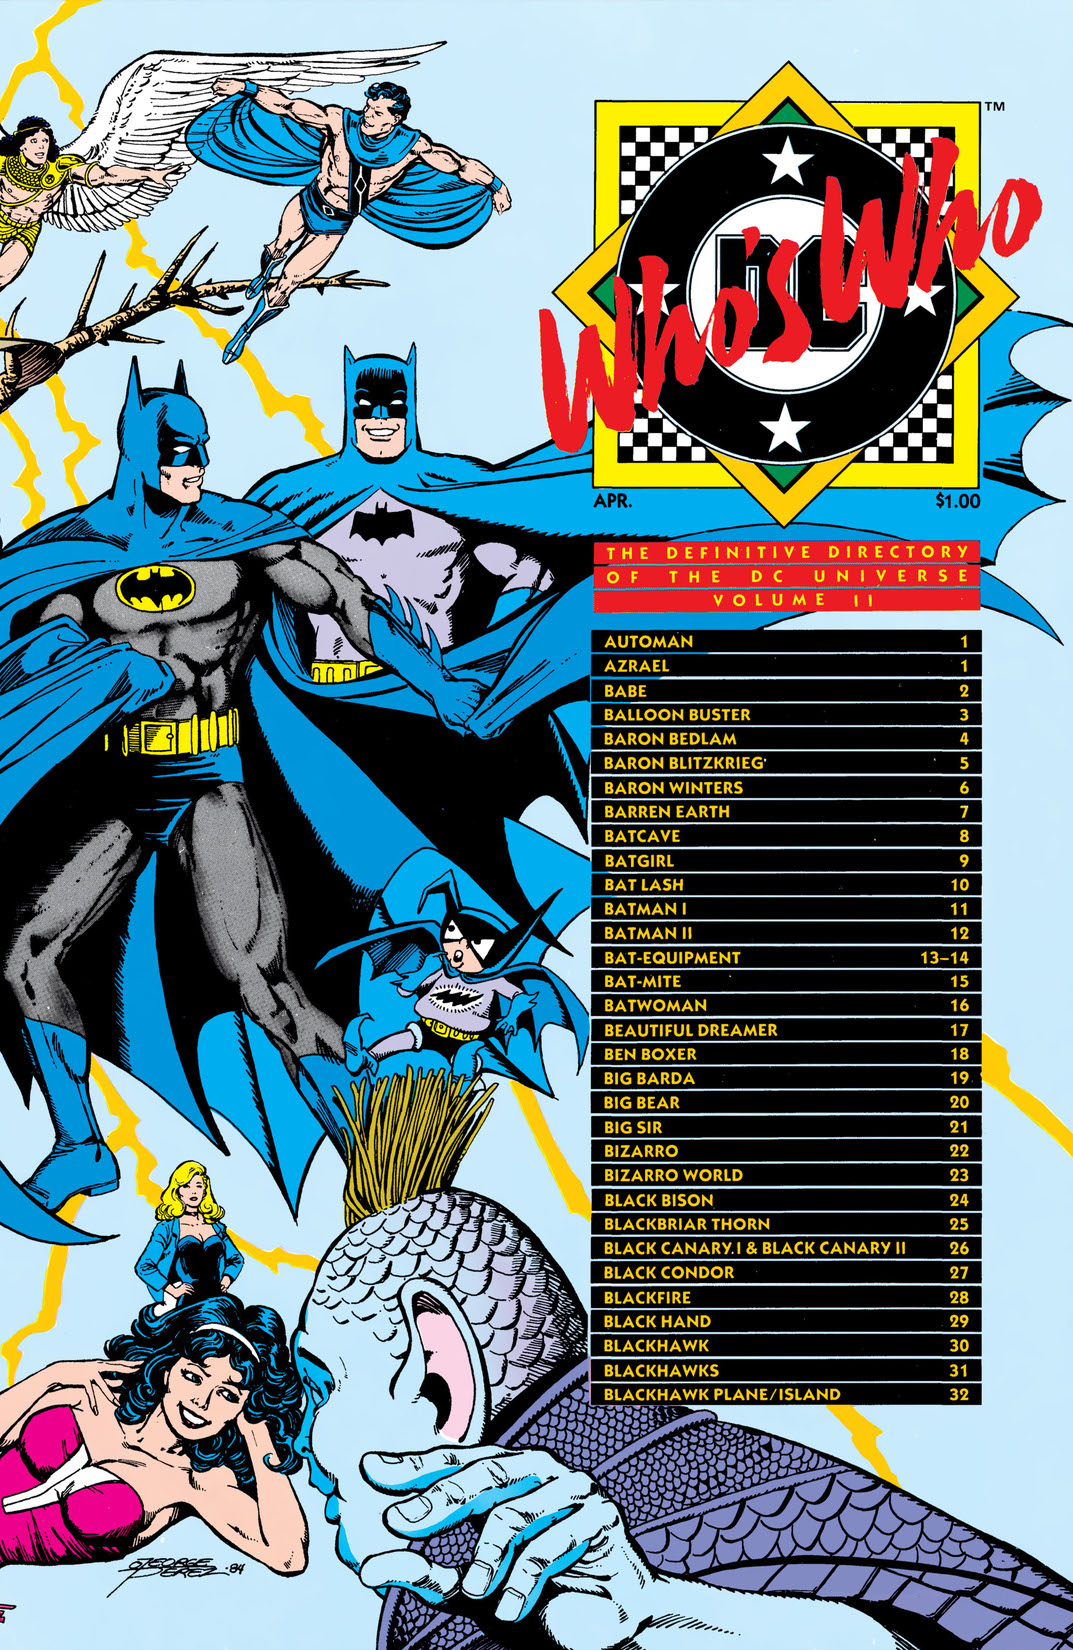 Who's Who: The Definitive Directory of the DC Universe #2 preview images